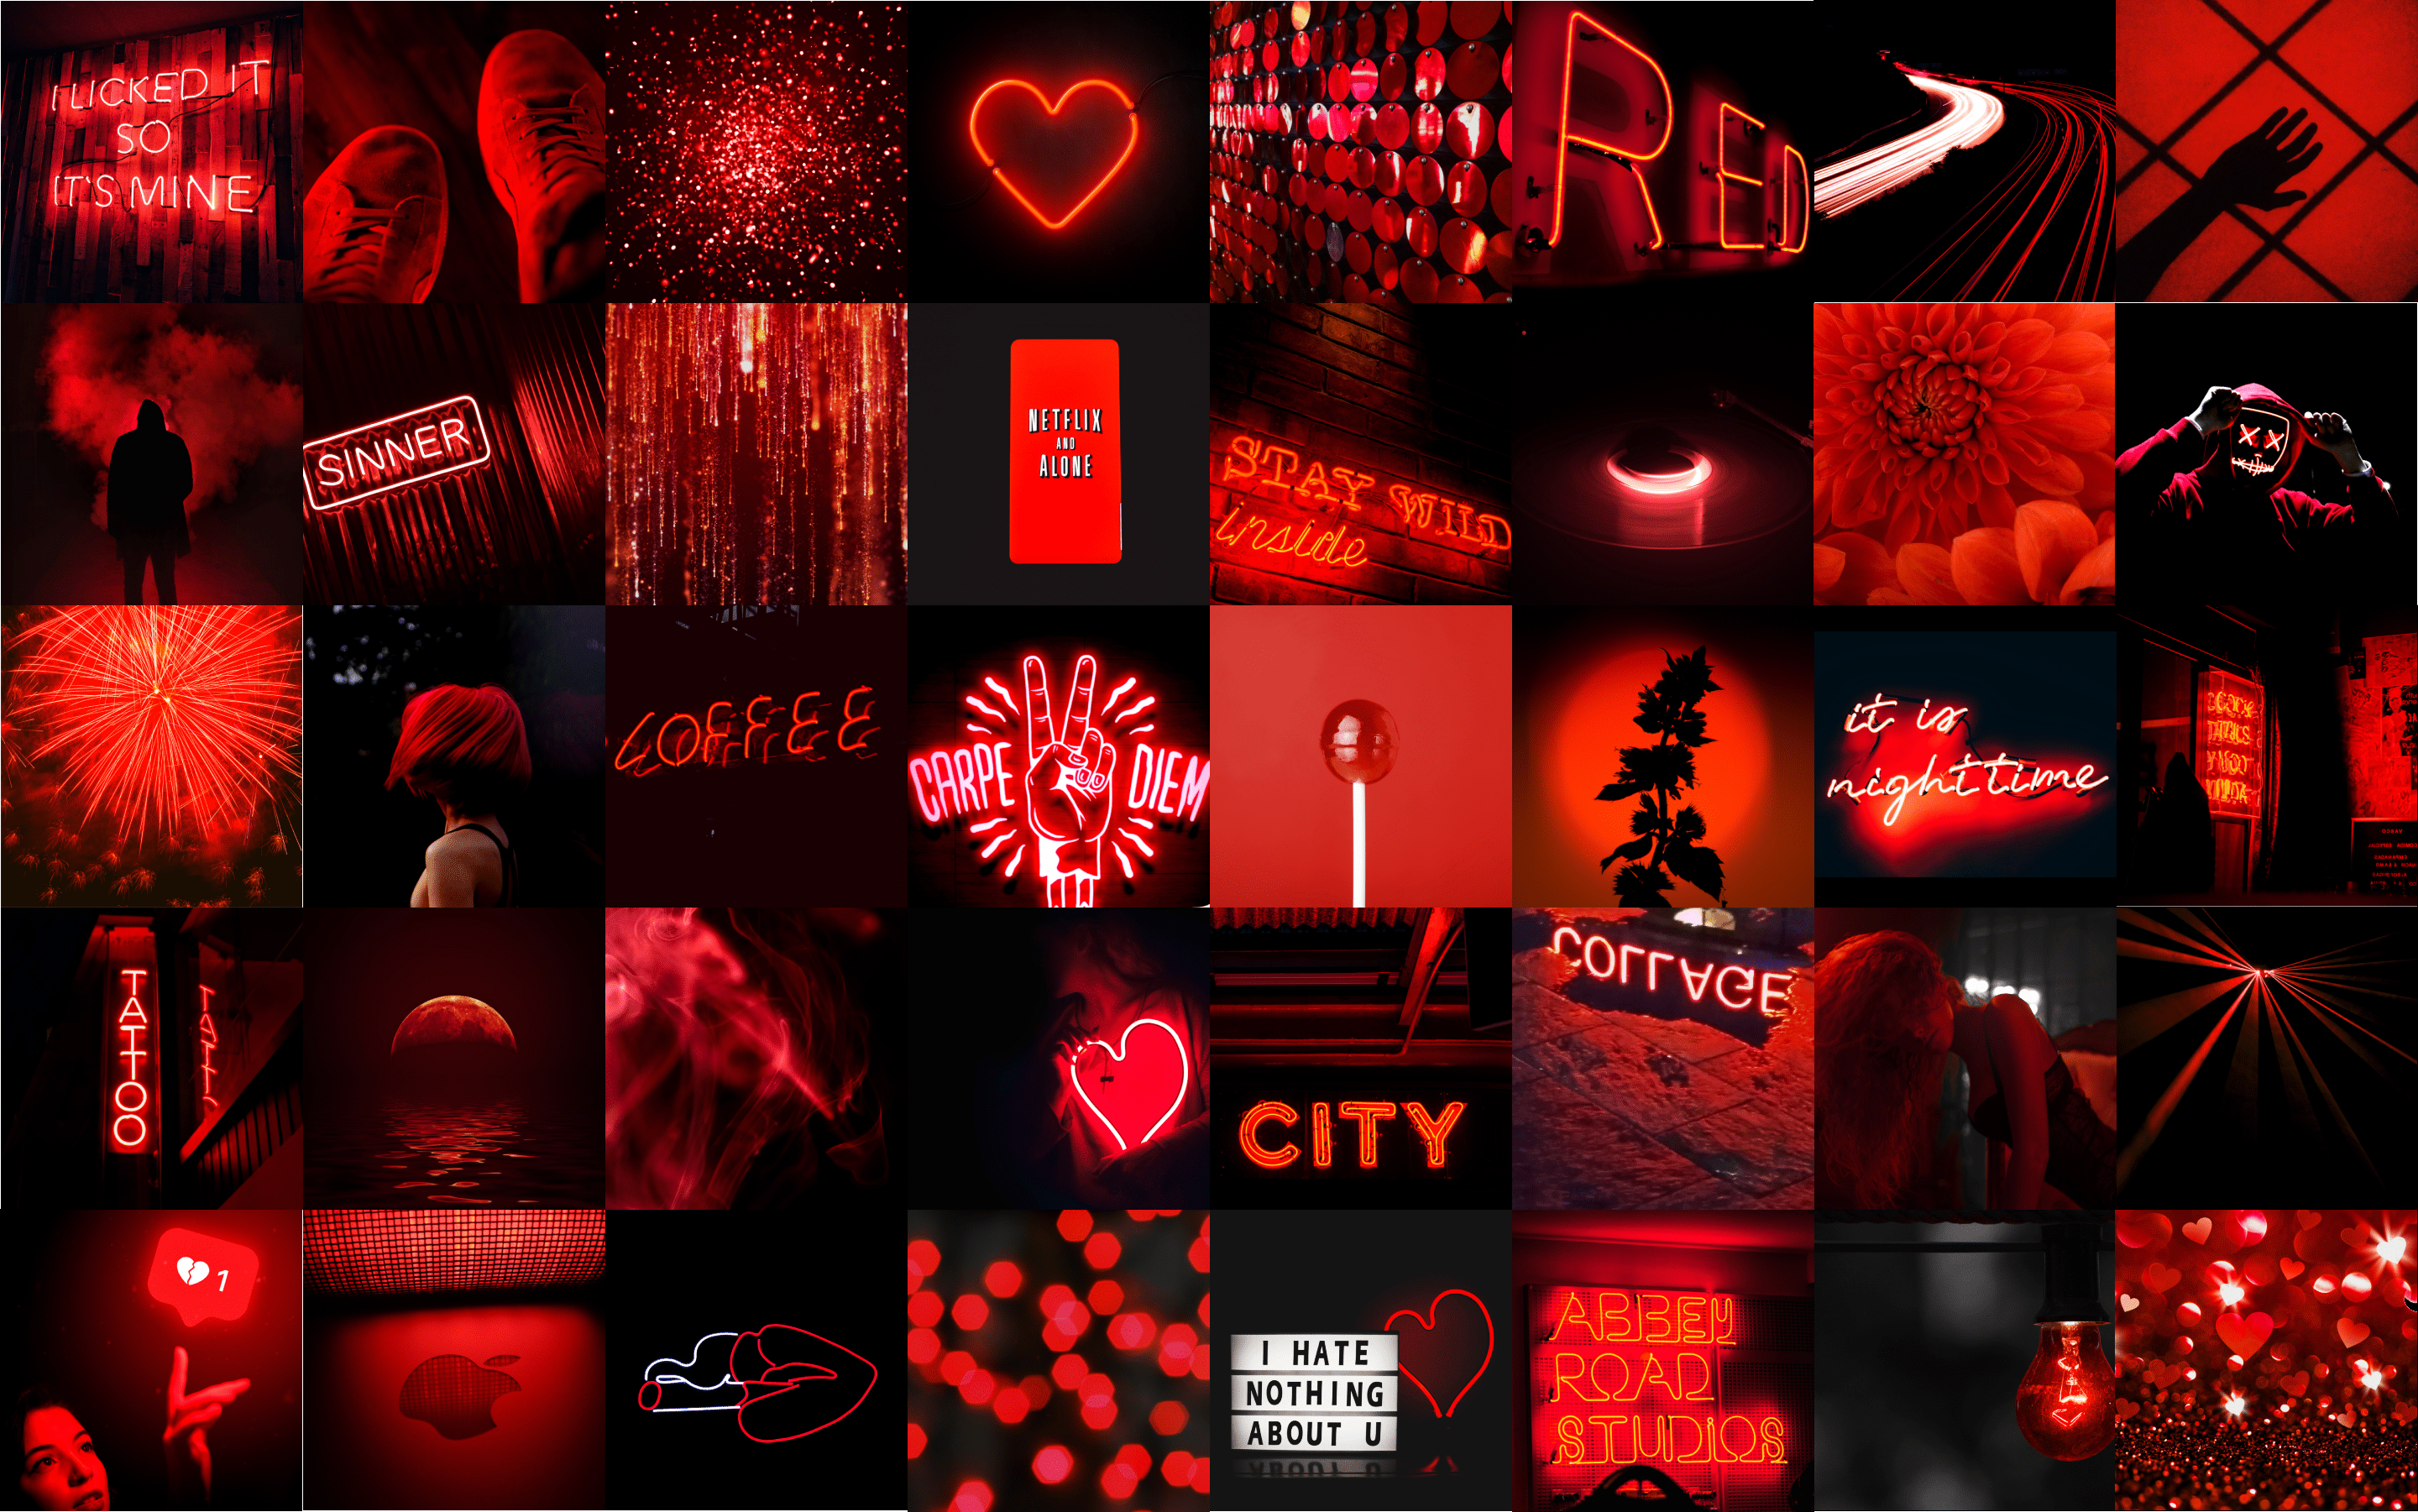 A collage of pictures with red and black colors - Dark red, neon red